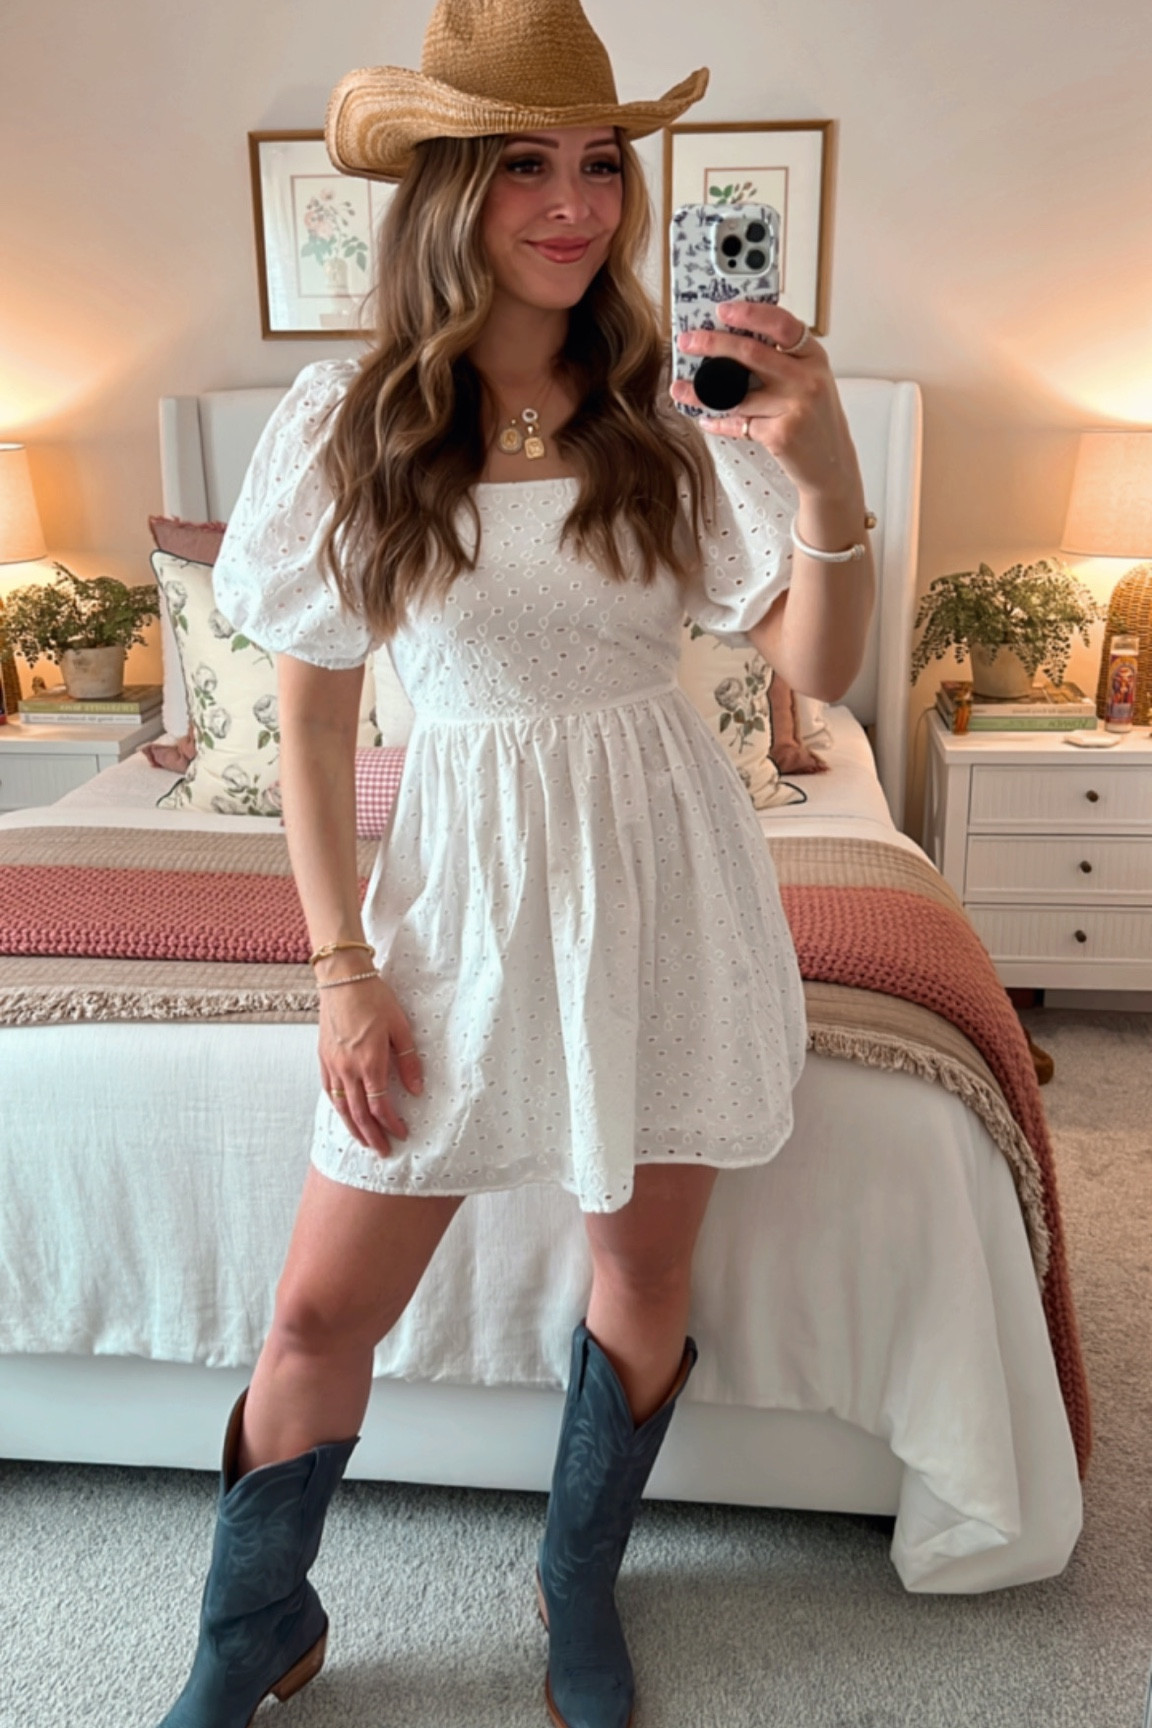 dress with cowgirl boots